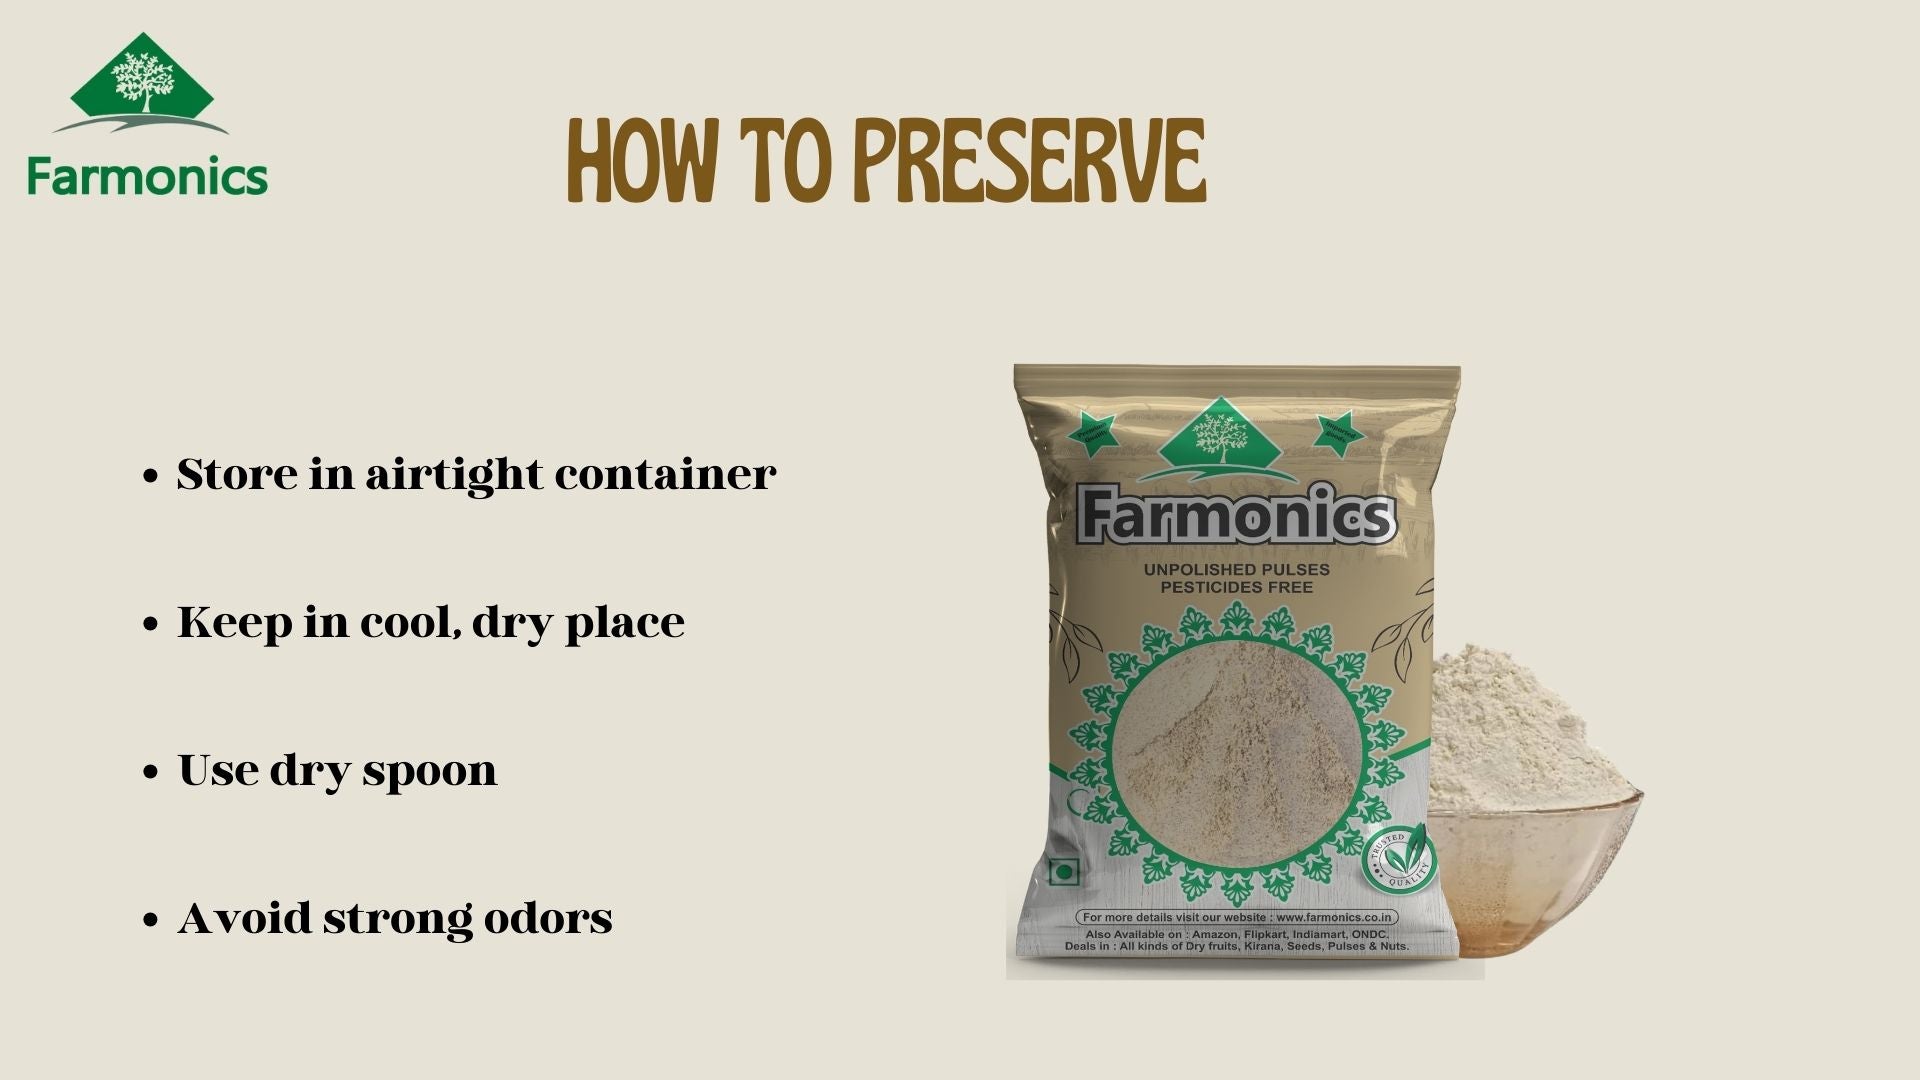 ways in which you can preserve farmonics chat masala 